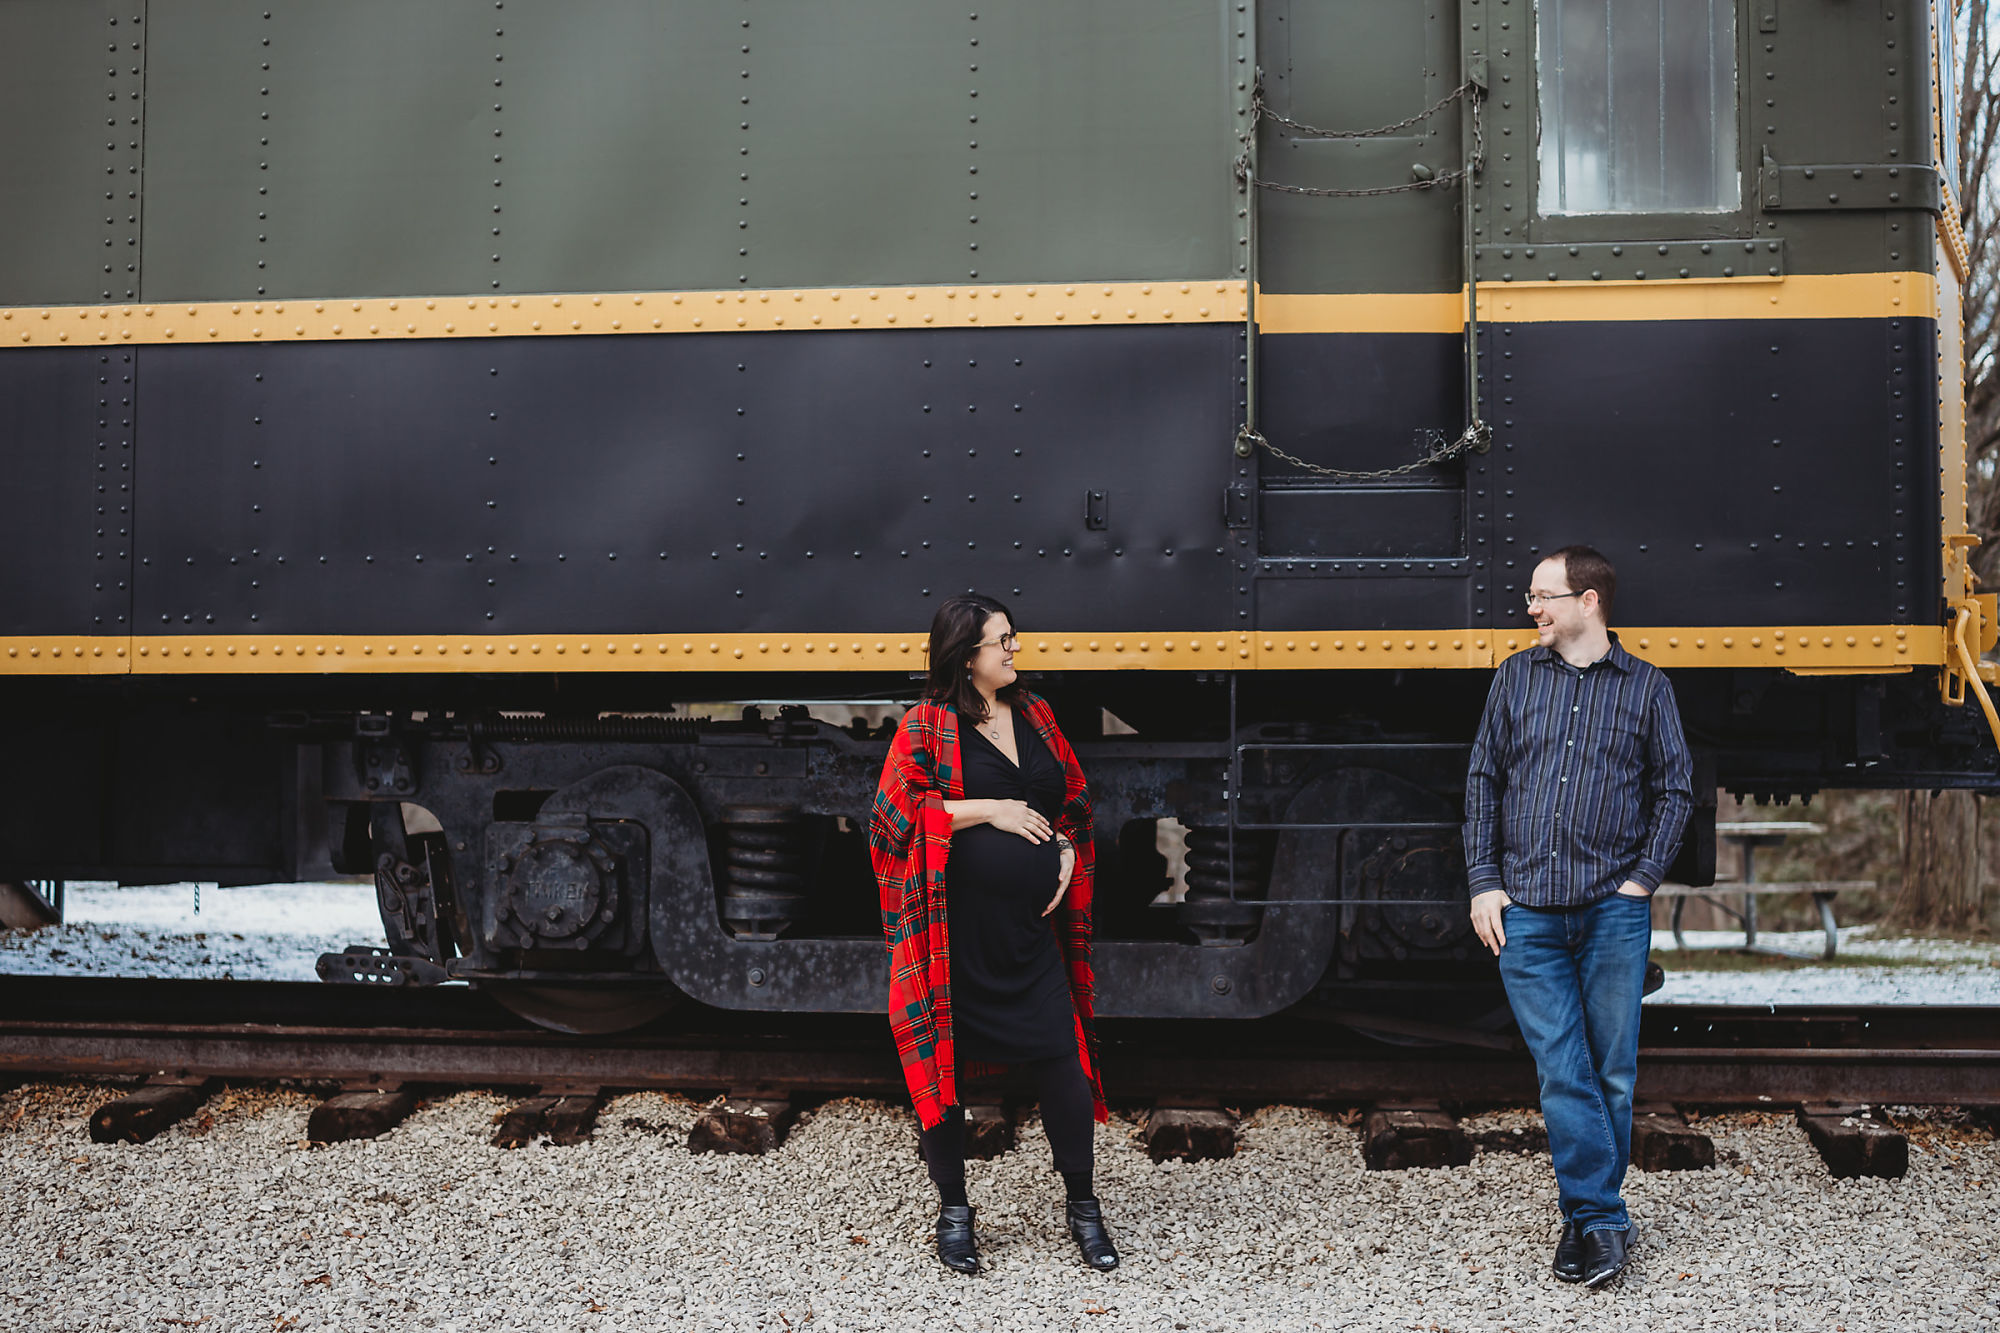 Andy & Erin pose in front of a museum train at Dundas Conservation Area in Hamilton Ontario during their maternity photoshoot with Dundas Maternity Photographer Jennifer Blaak.